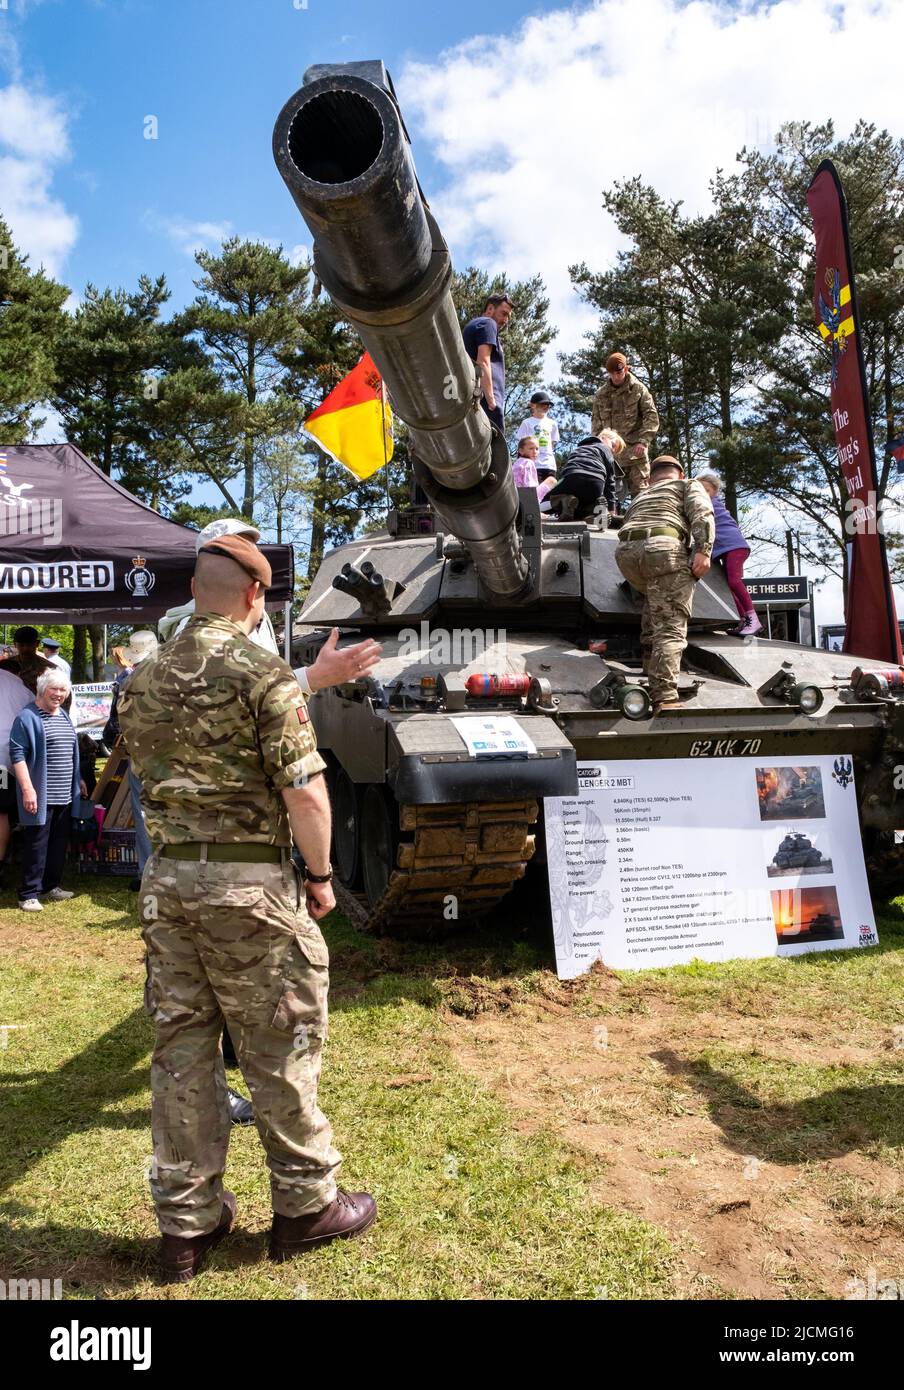 Massive Chieftain tank as part of the Army display at the Royal Cornwall show. Climbed all over by children and adults. Soldiers keeping people safe. Stock Photo